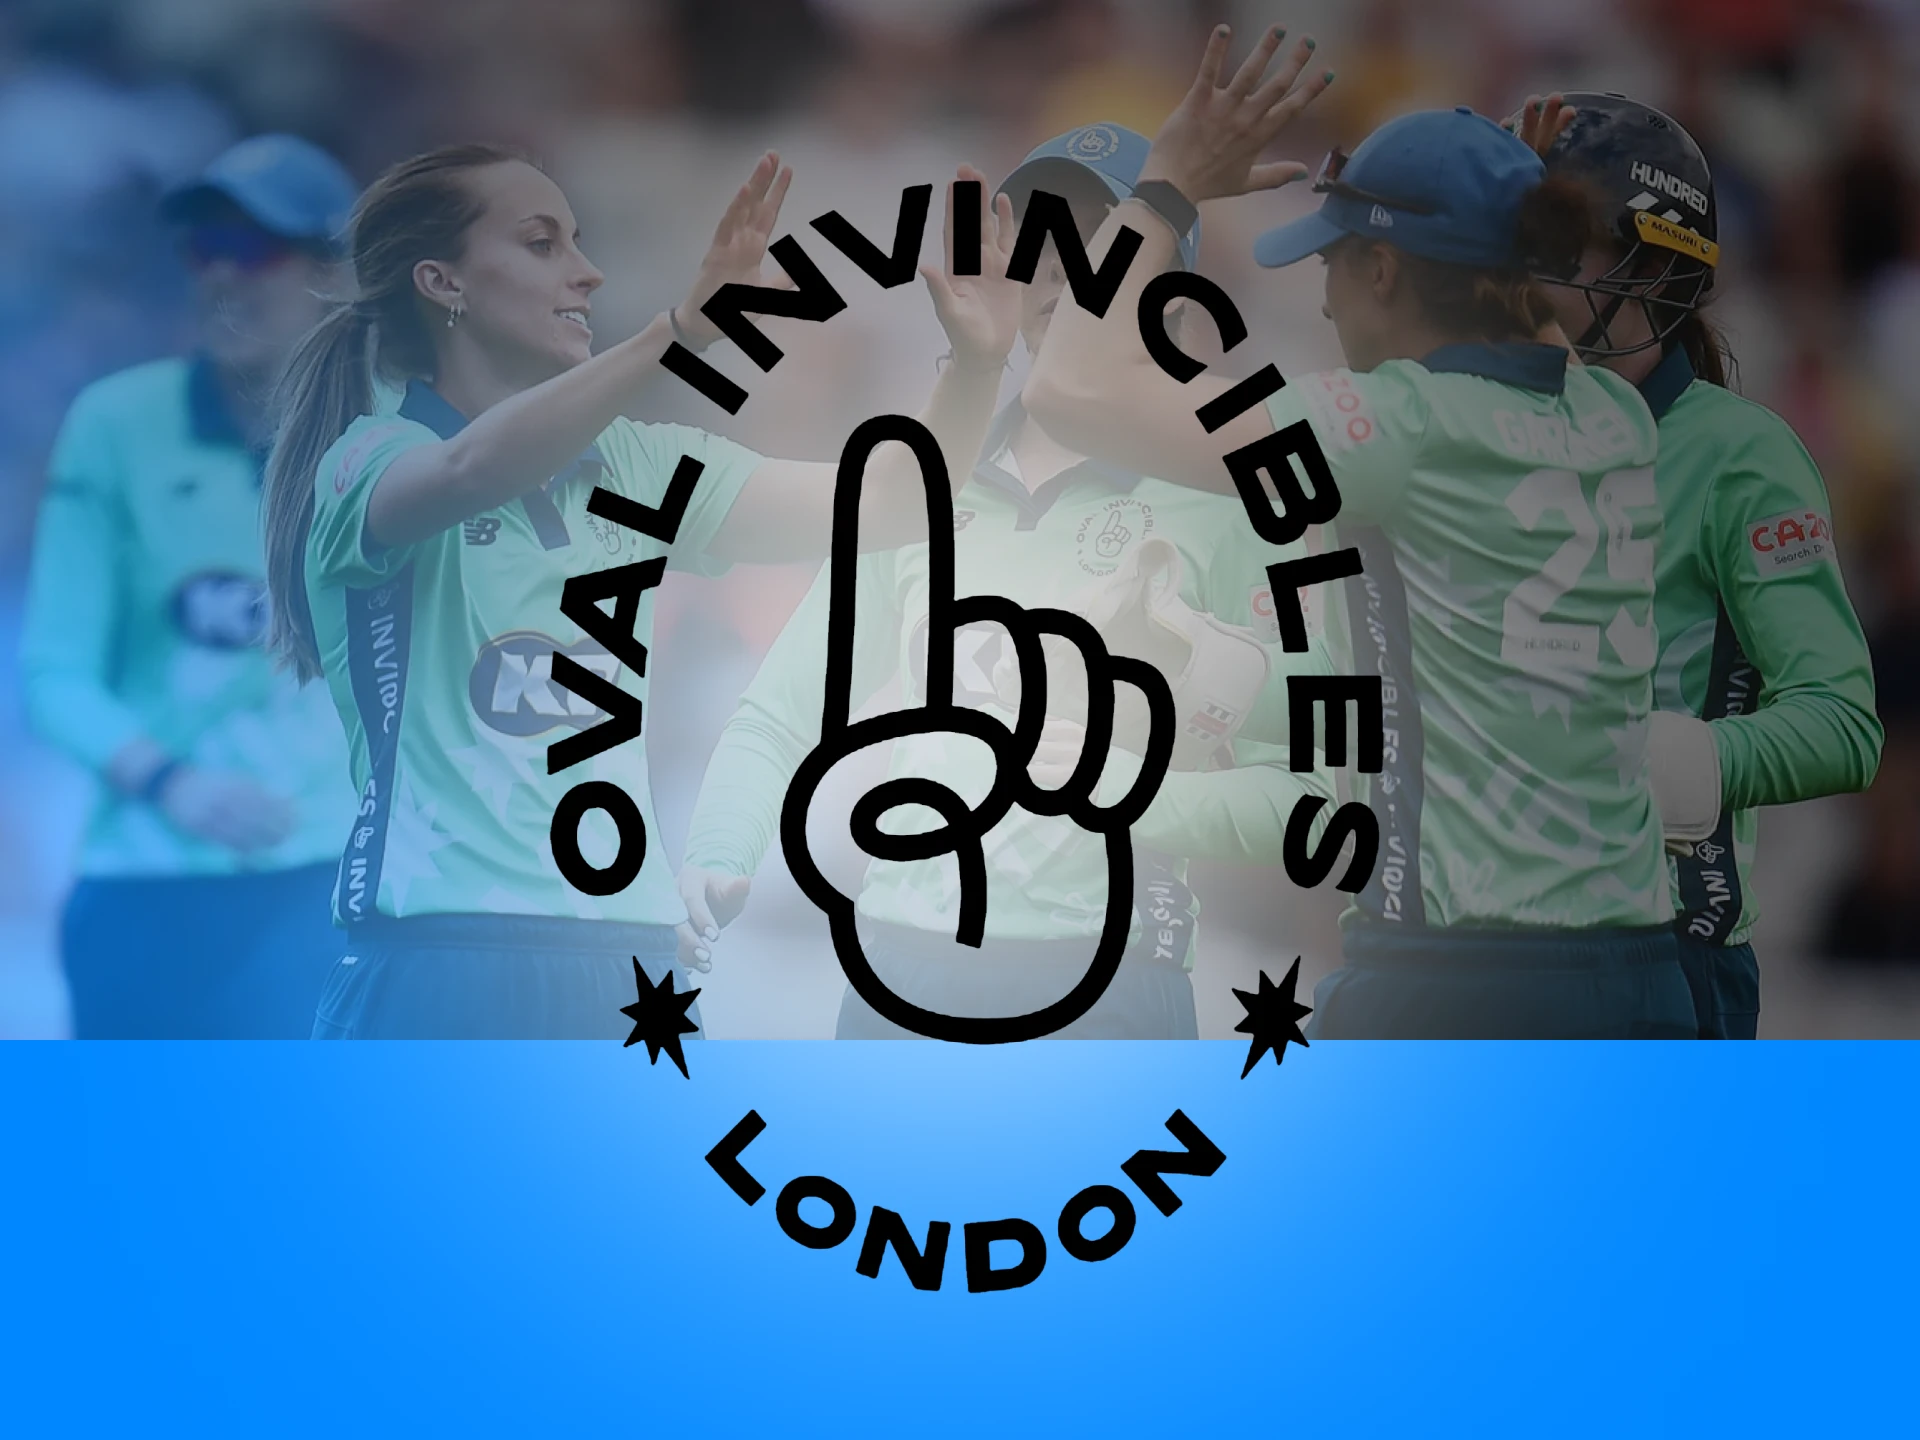 Watch Oval Invincibles games and start betting on it.